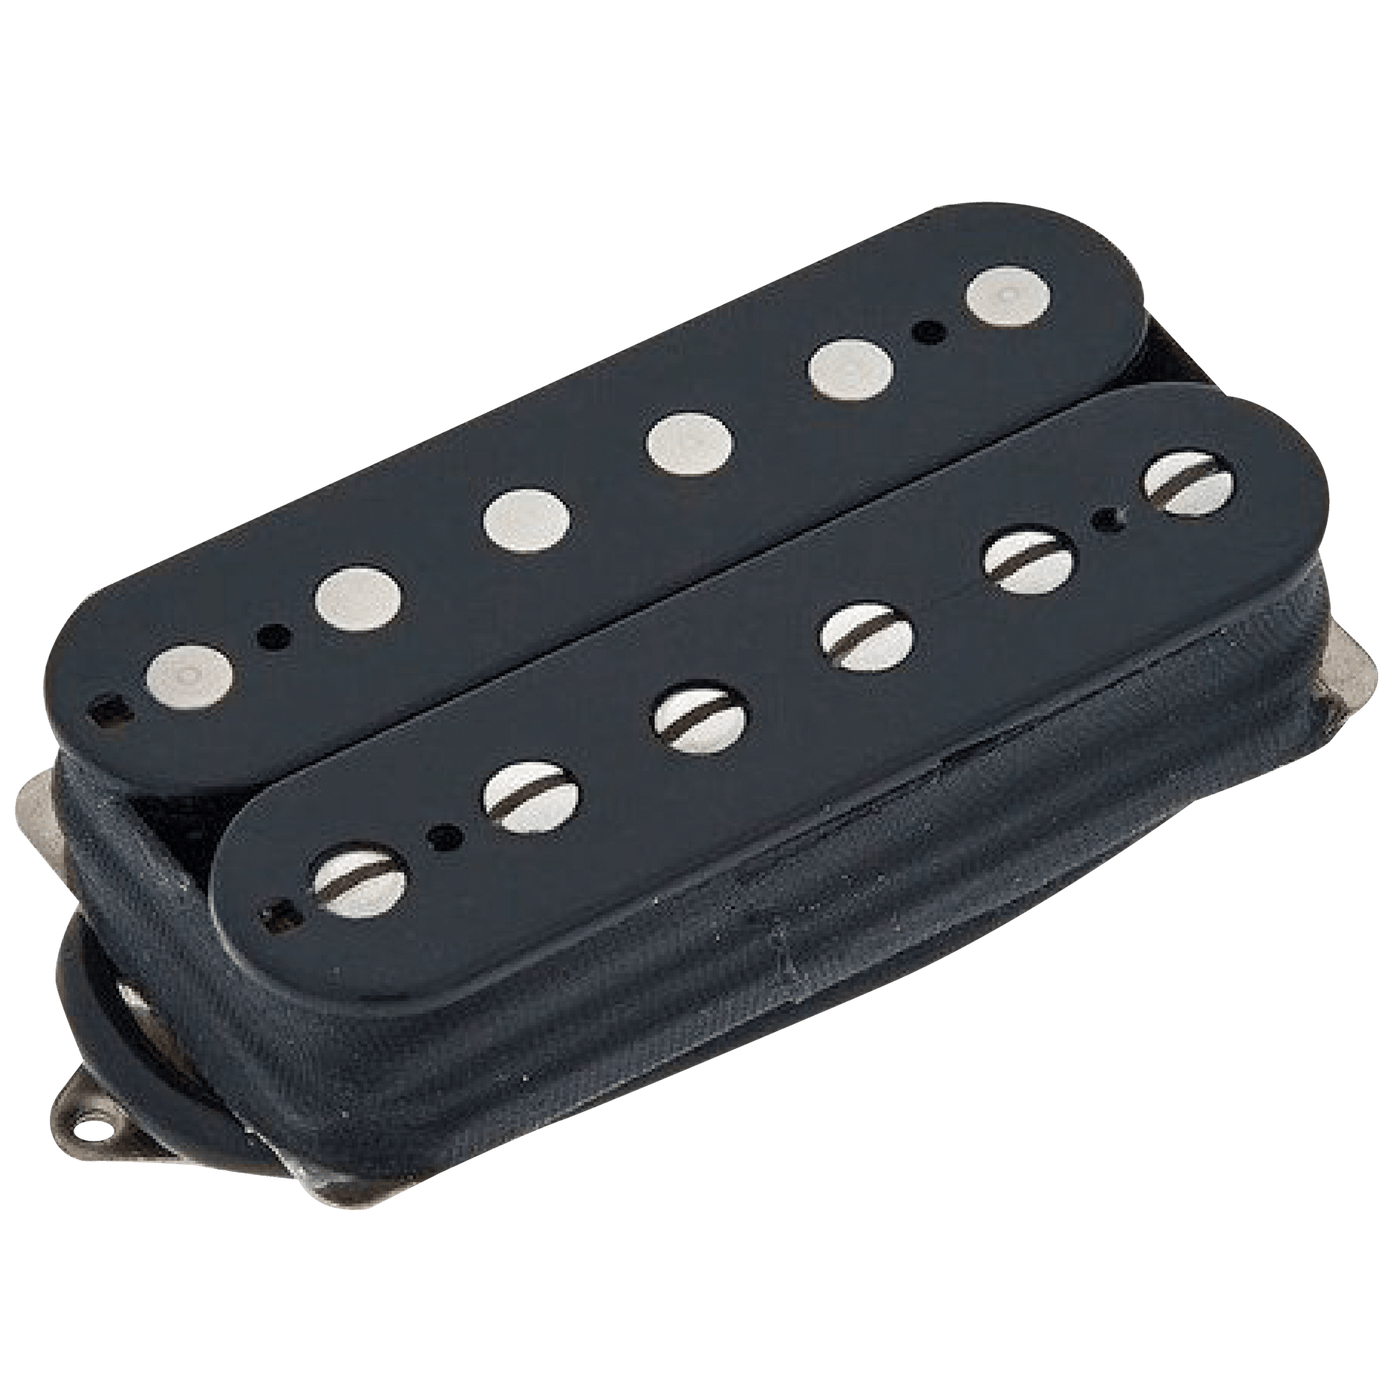 Suhr Aldrich Signature Humbucker Black (Bridge) - $169990 - Gearhub - The result of collaboration between John Suhr and rock guitarist extraordinaire Doug Aldrich, the Aldrich humbuckers are the ultimate high-output pickups for aggressive rock style of playing. The Aldrich bridge humbucker is now our highest output pickup but it oozes tone across its sound spectrum Spacing • 50mm DC Resistance • 9K Ω Hook Up Wire • 4-Conductor Magnet • Alnico V Special